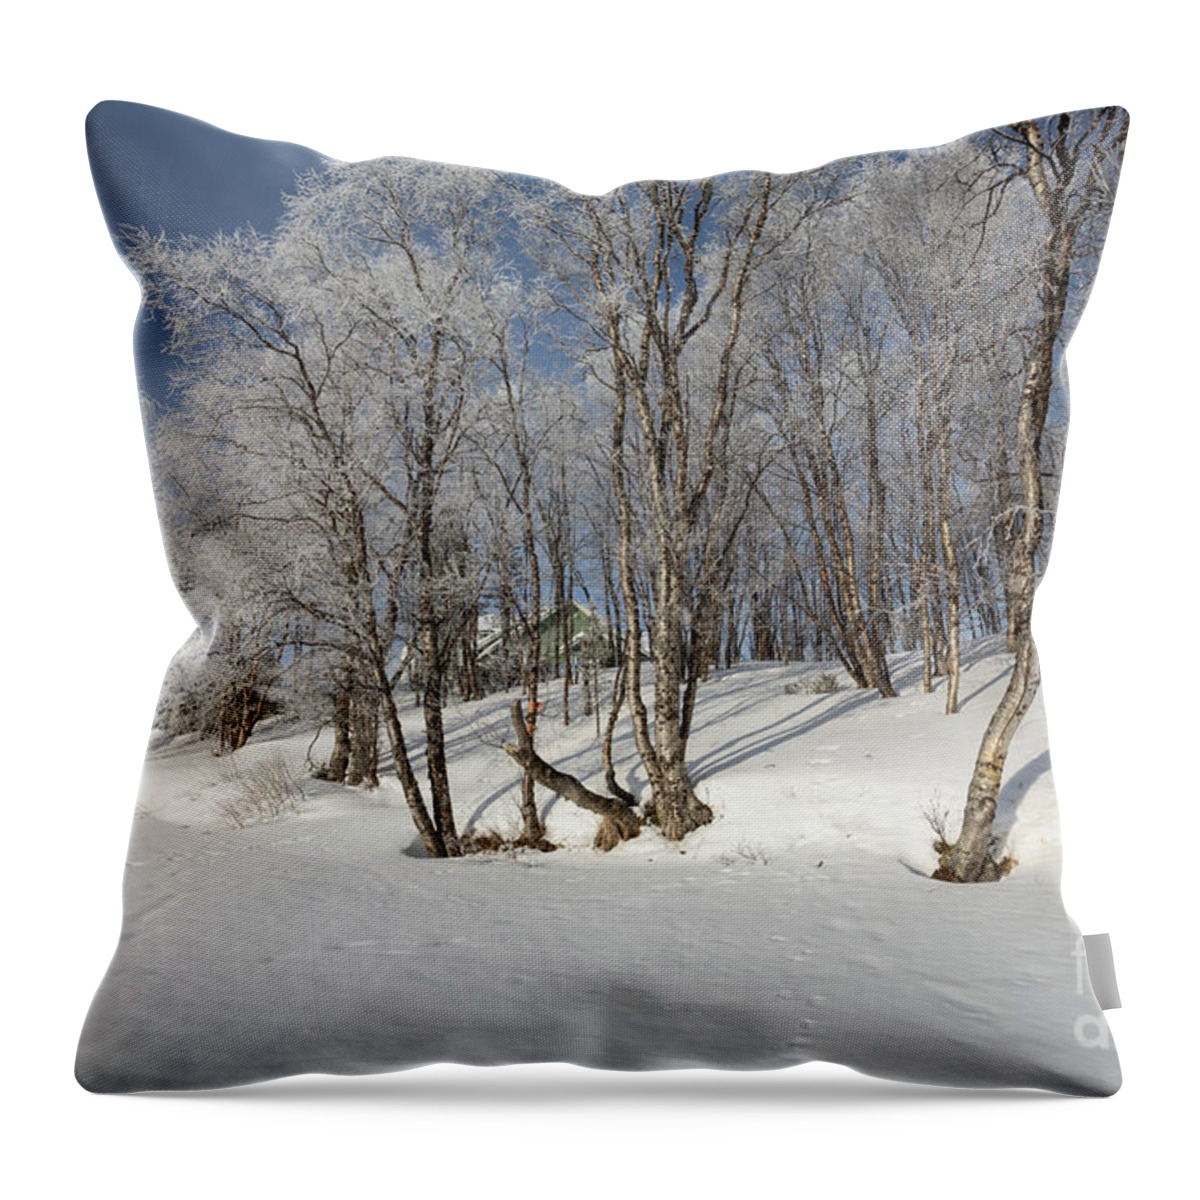 Snow Throw Pillow featuring the photograph Winter Dream by Eva Lechner